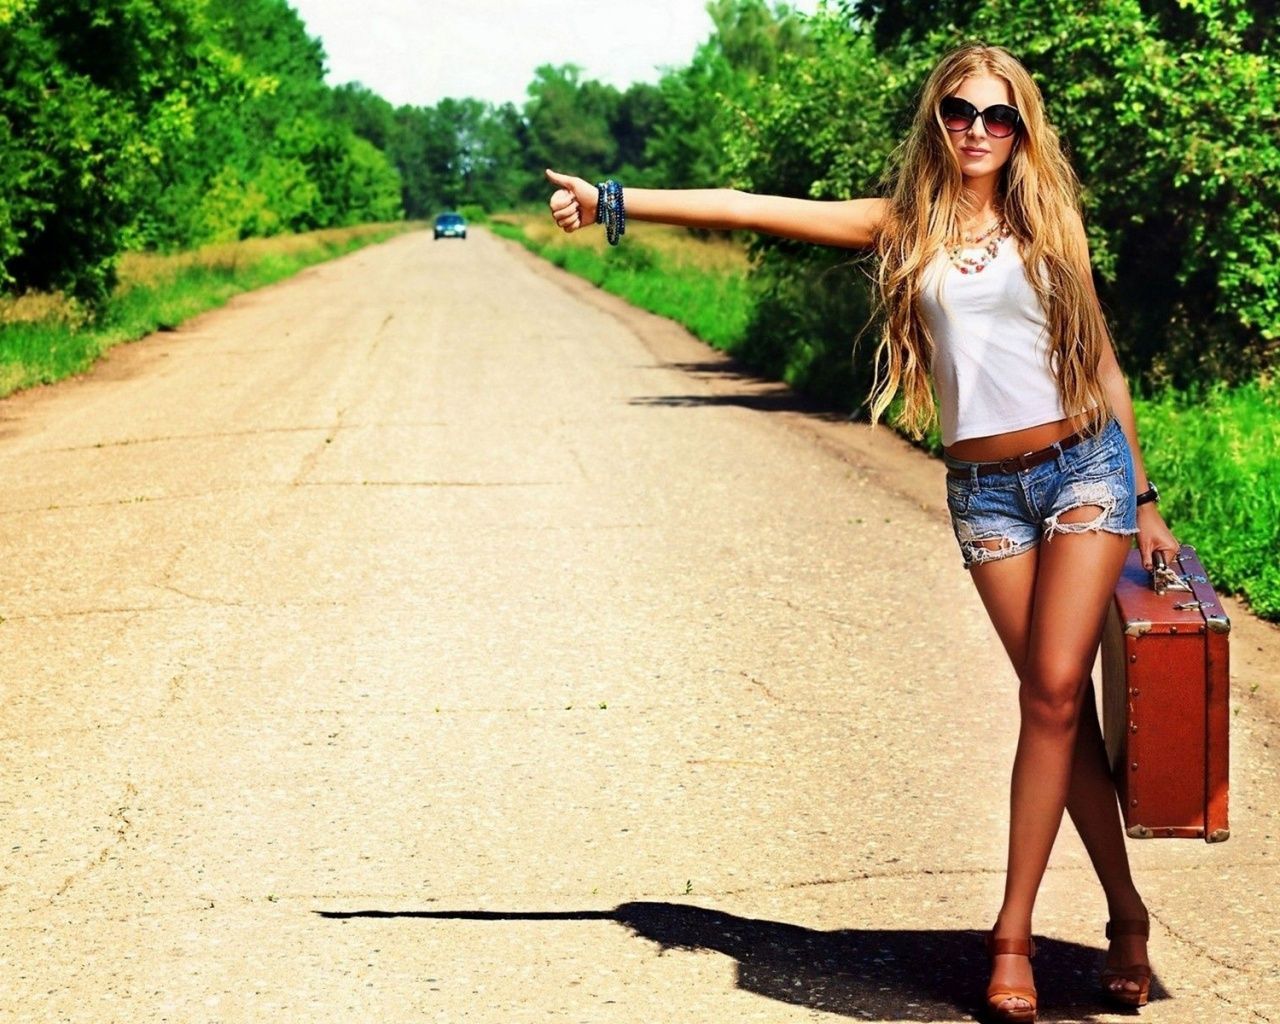 Hitchhiking Girl Wallpaper more on Classy Bro